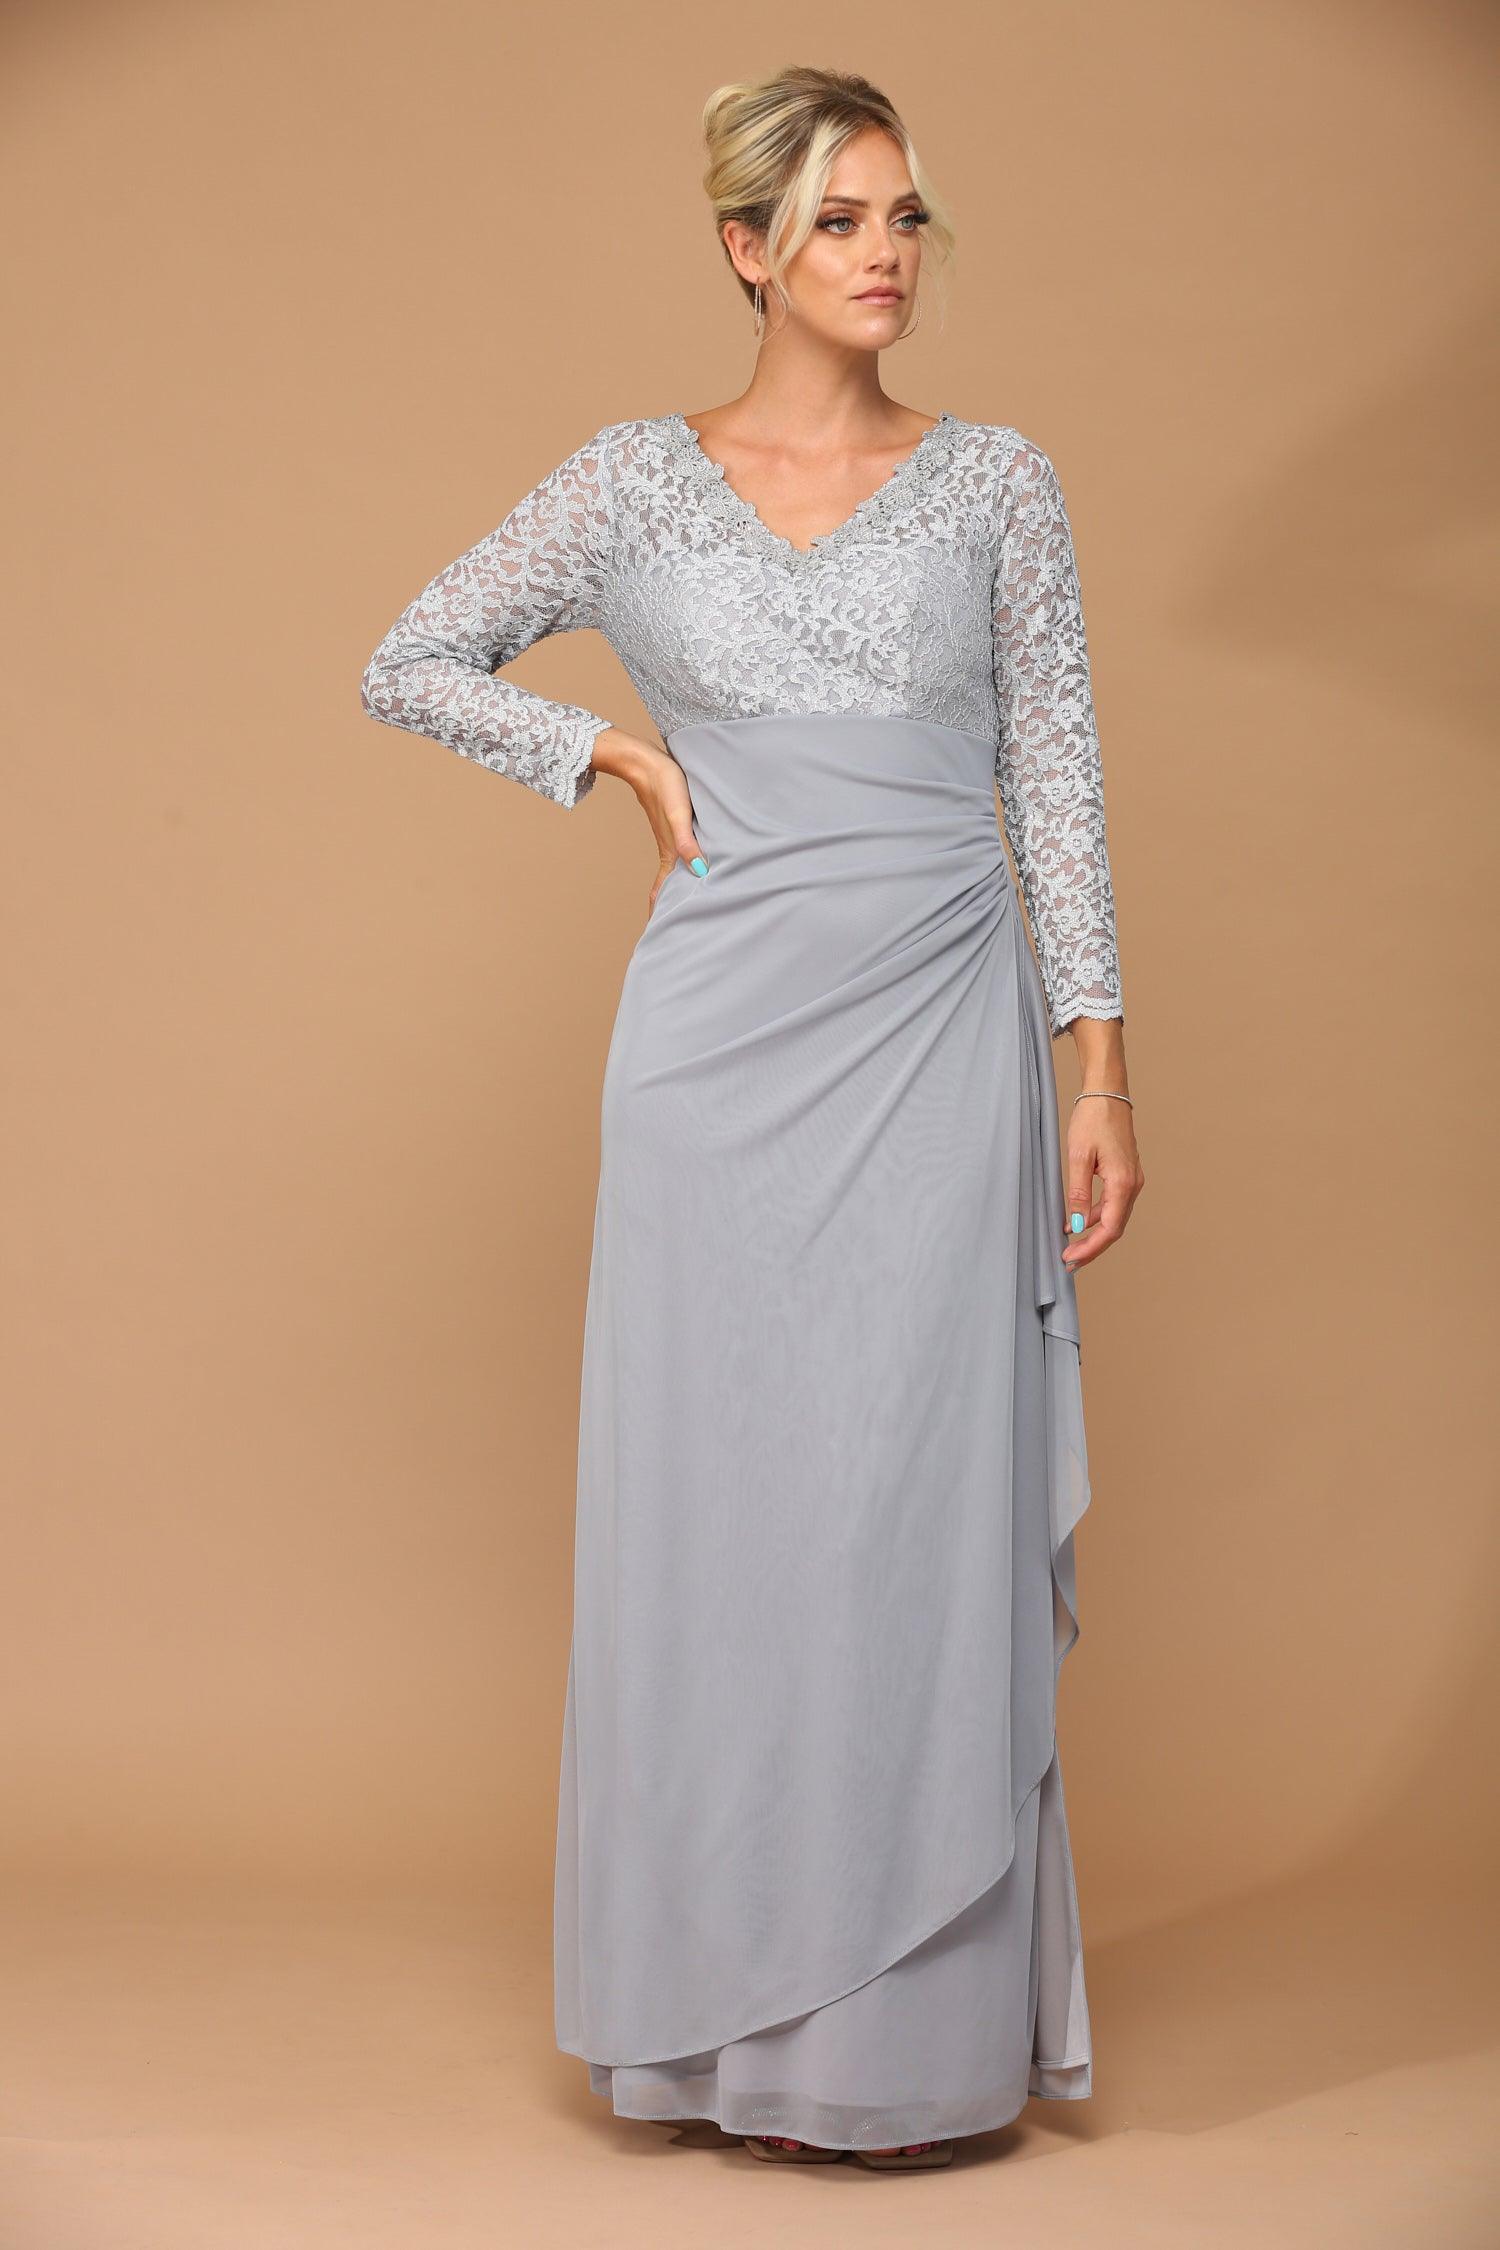 Long Sleeve Formal Mother of the Bride Evening Gown